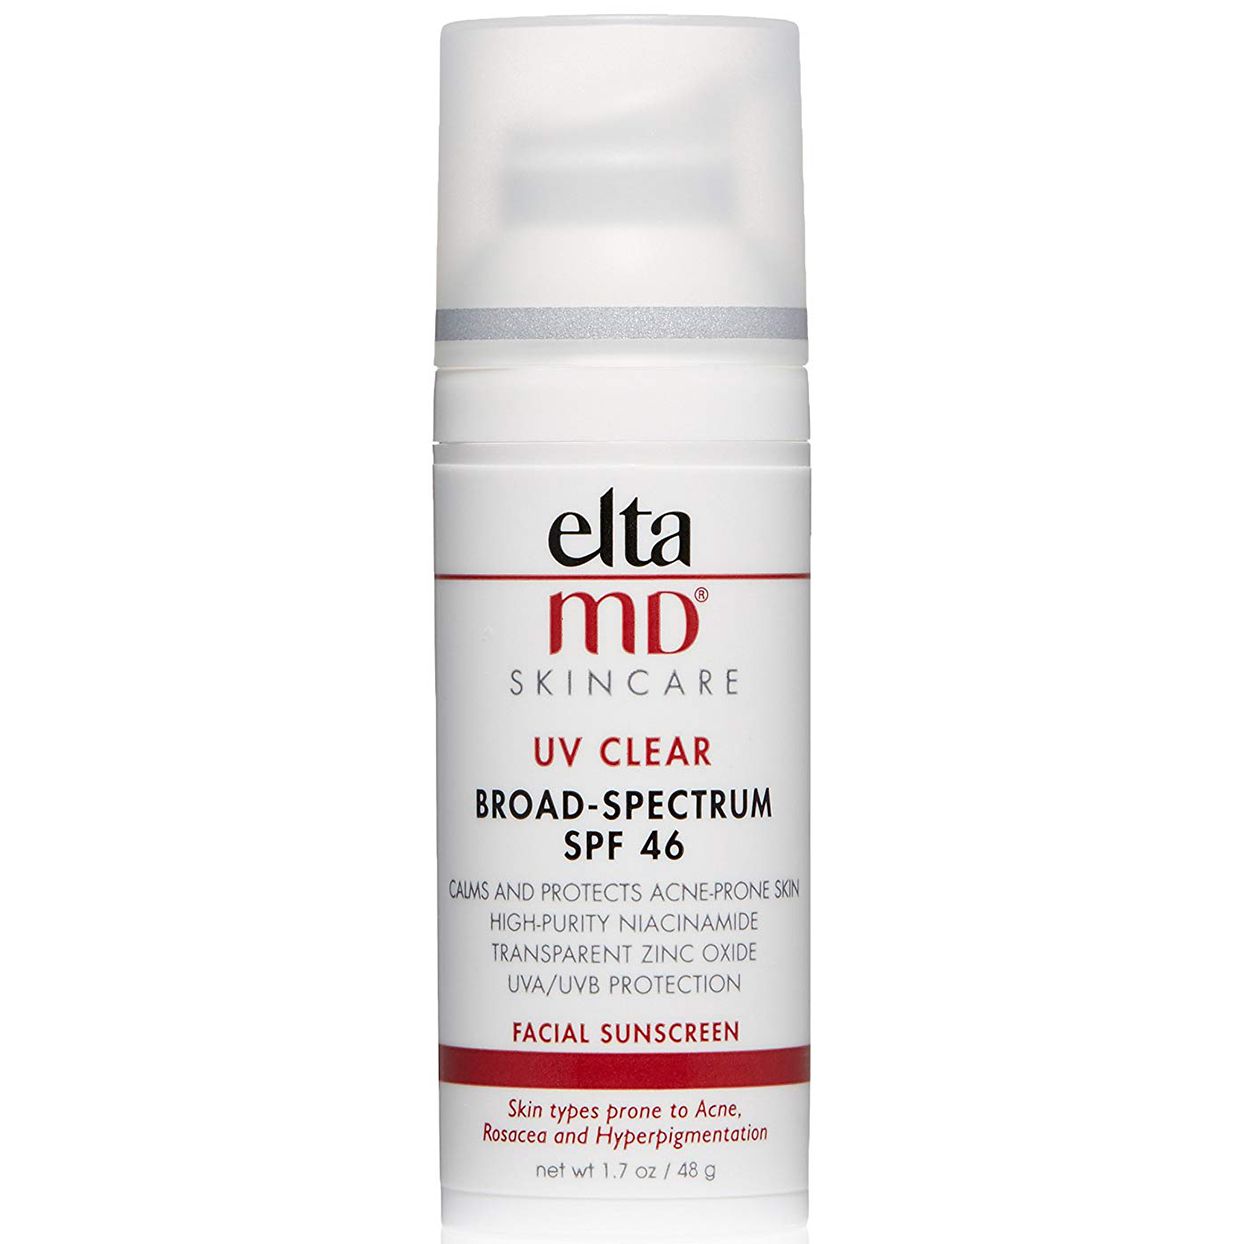 Best Face Sunscreen for Oily Skin or Acne: EltaMD UV Clear Broad-Spectrum SPF 46